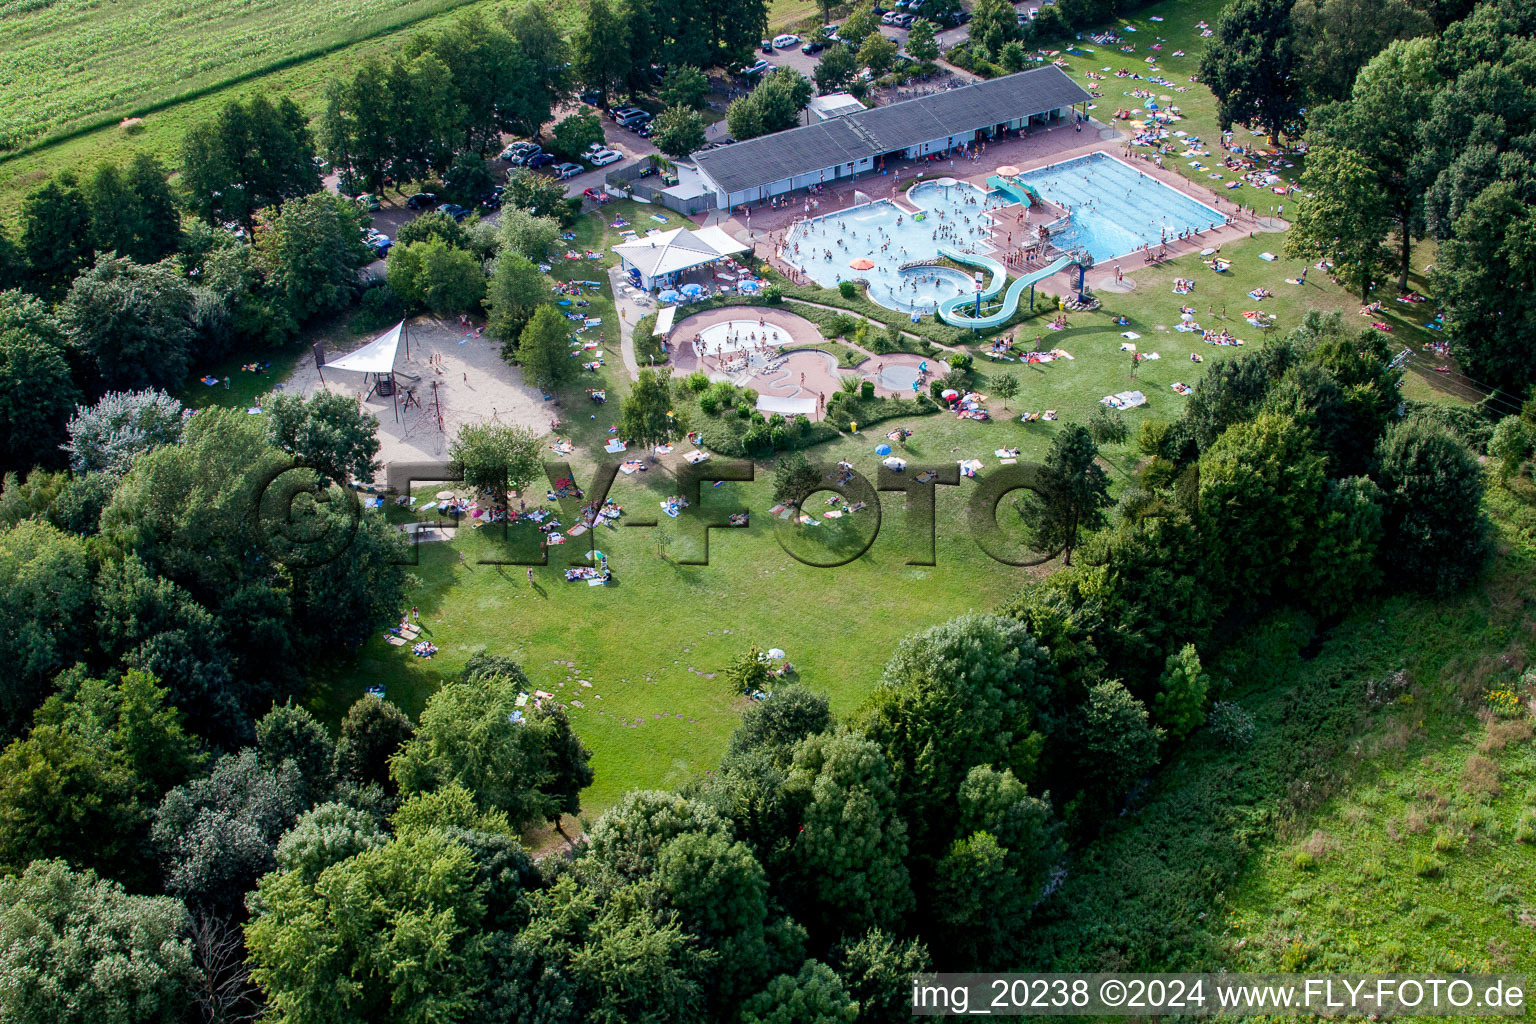 Aerial view of Waterslide on Swimming pool of the Waldschwimmbad Kandel in Kandel in the state Rhineland-Palatinate, Germany